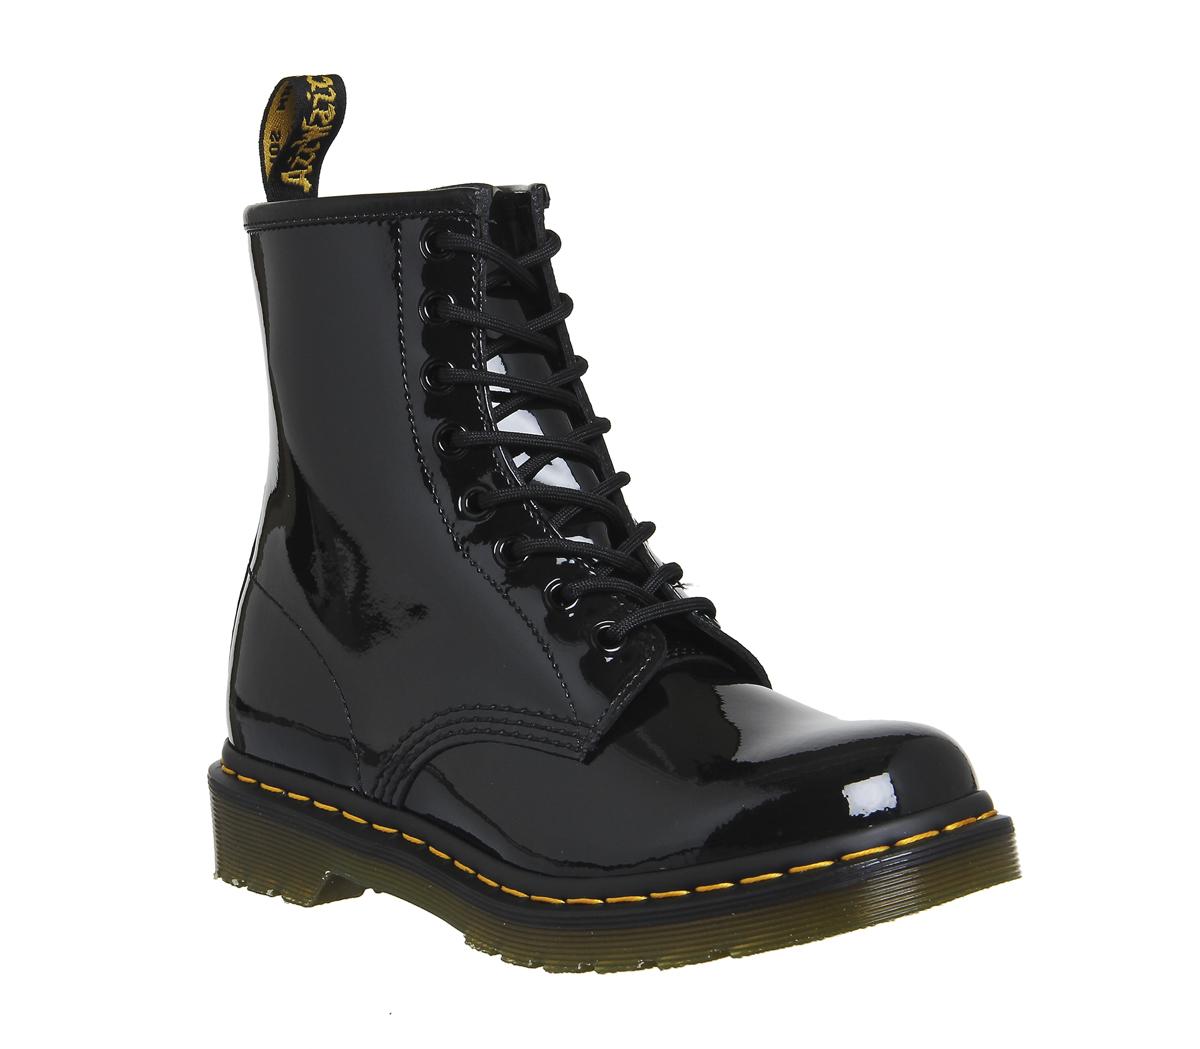 Dr. Martens 8 Eyelet Lace Up Boots Black Patent - Ankle Boots